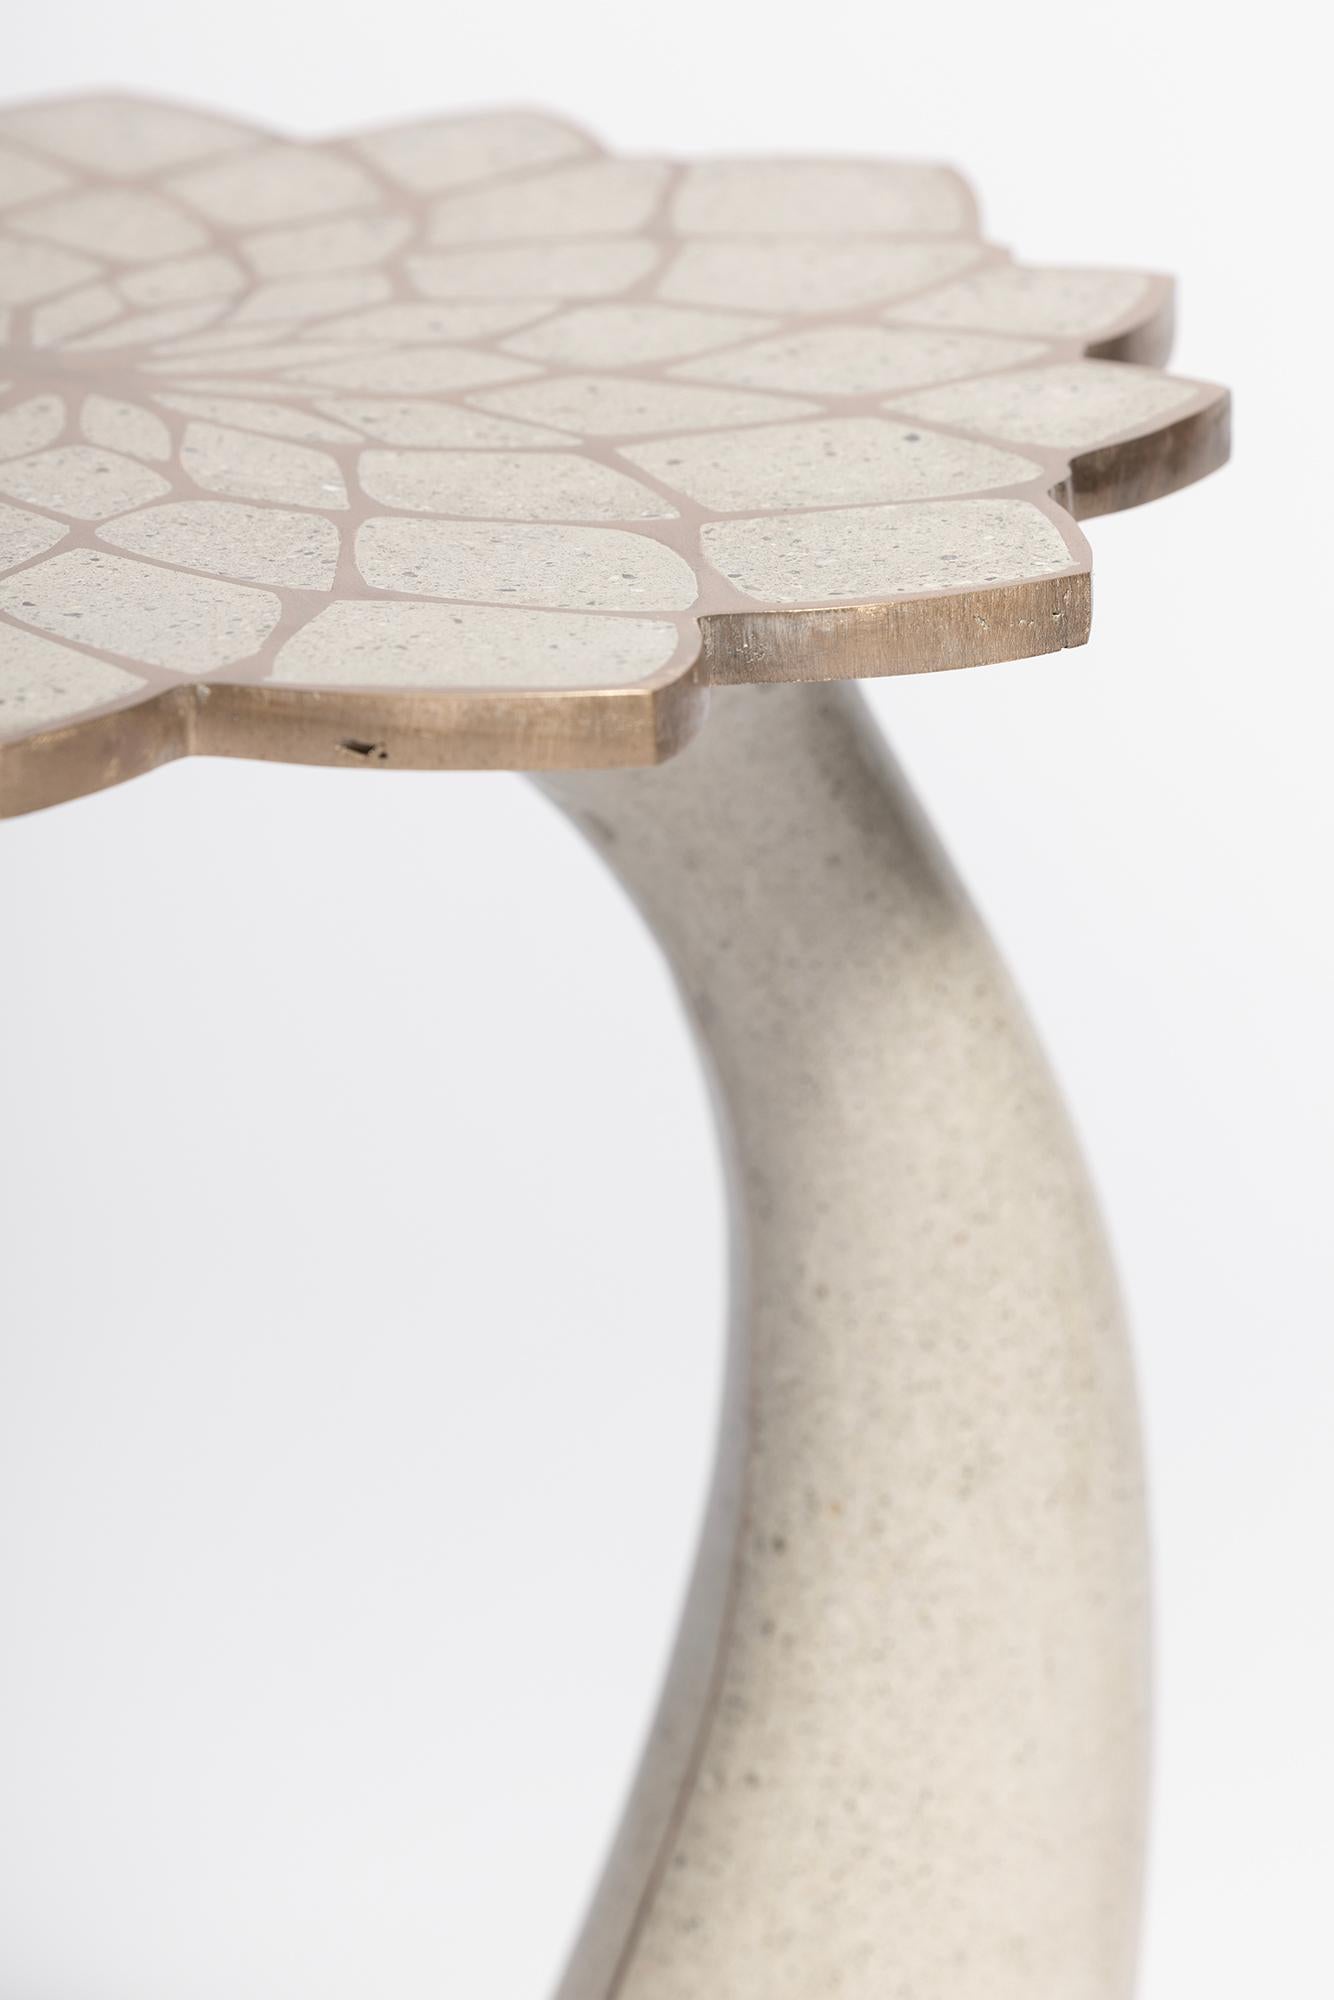 James de Wulf Exo Mosaic Lily Side Table For Sale 4